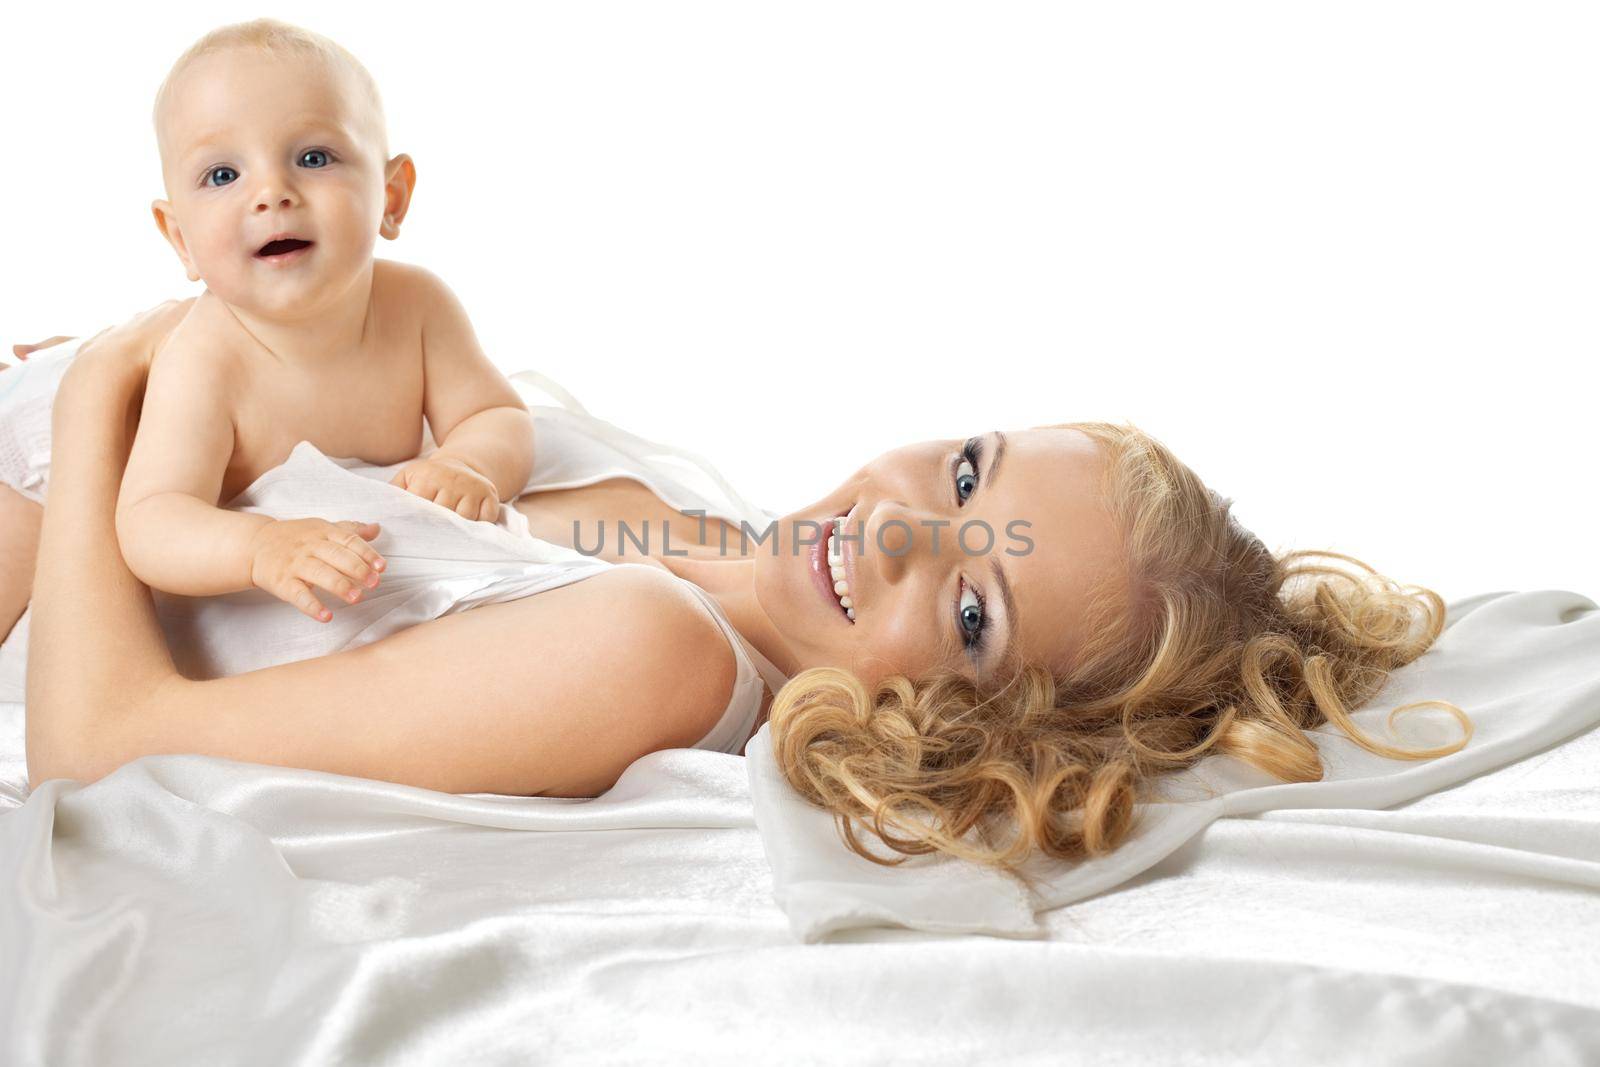 Beauty baby sit on smiling mom on silk bed look at camera